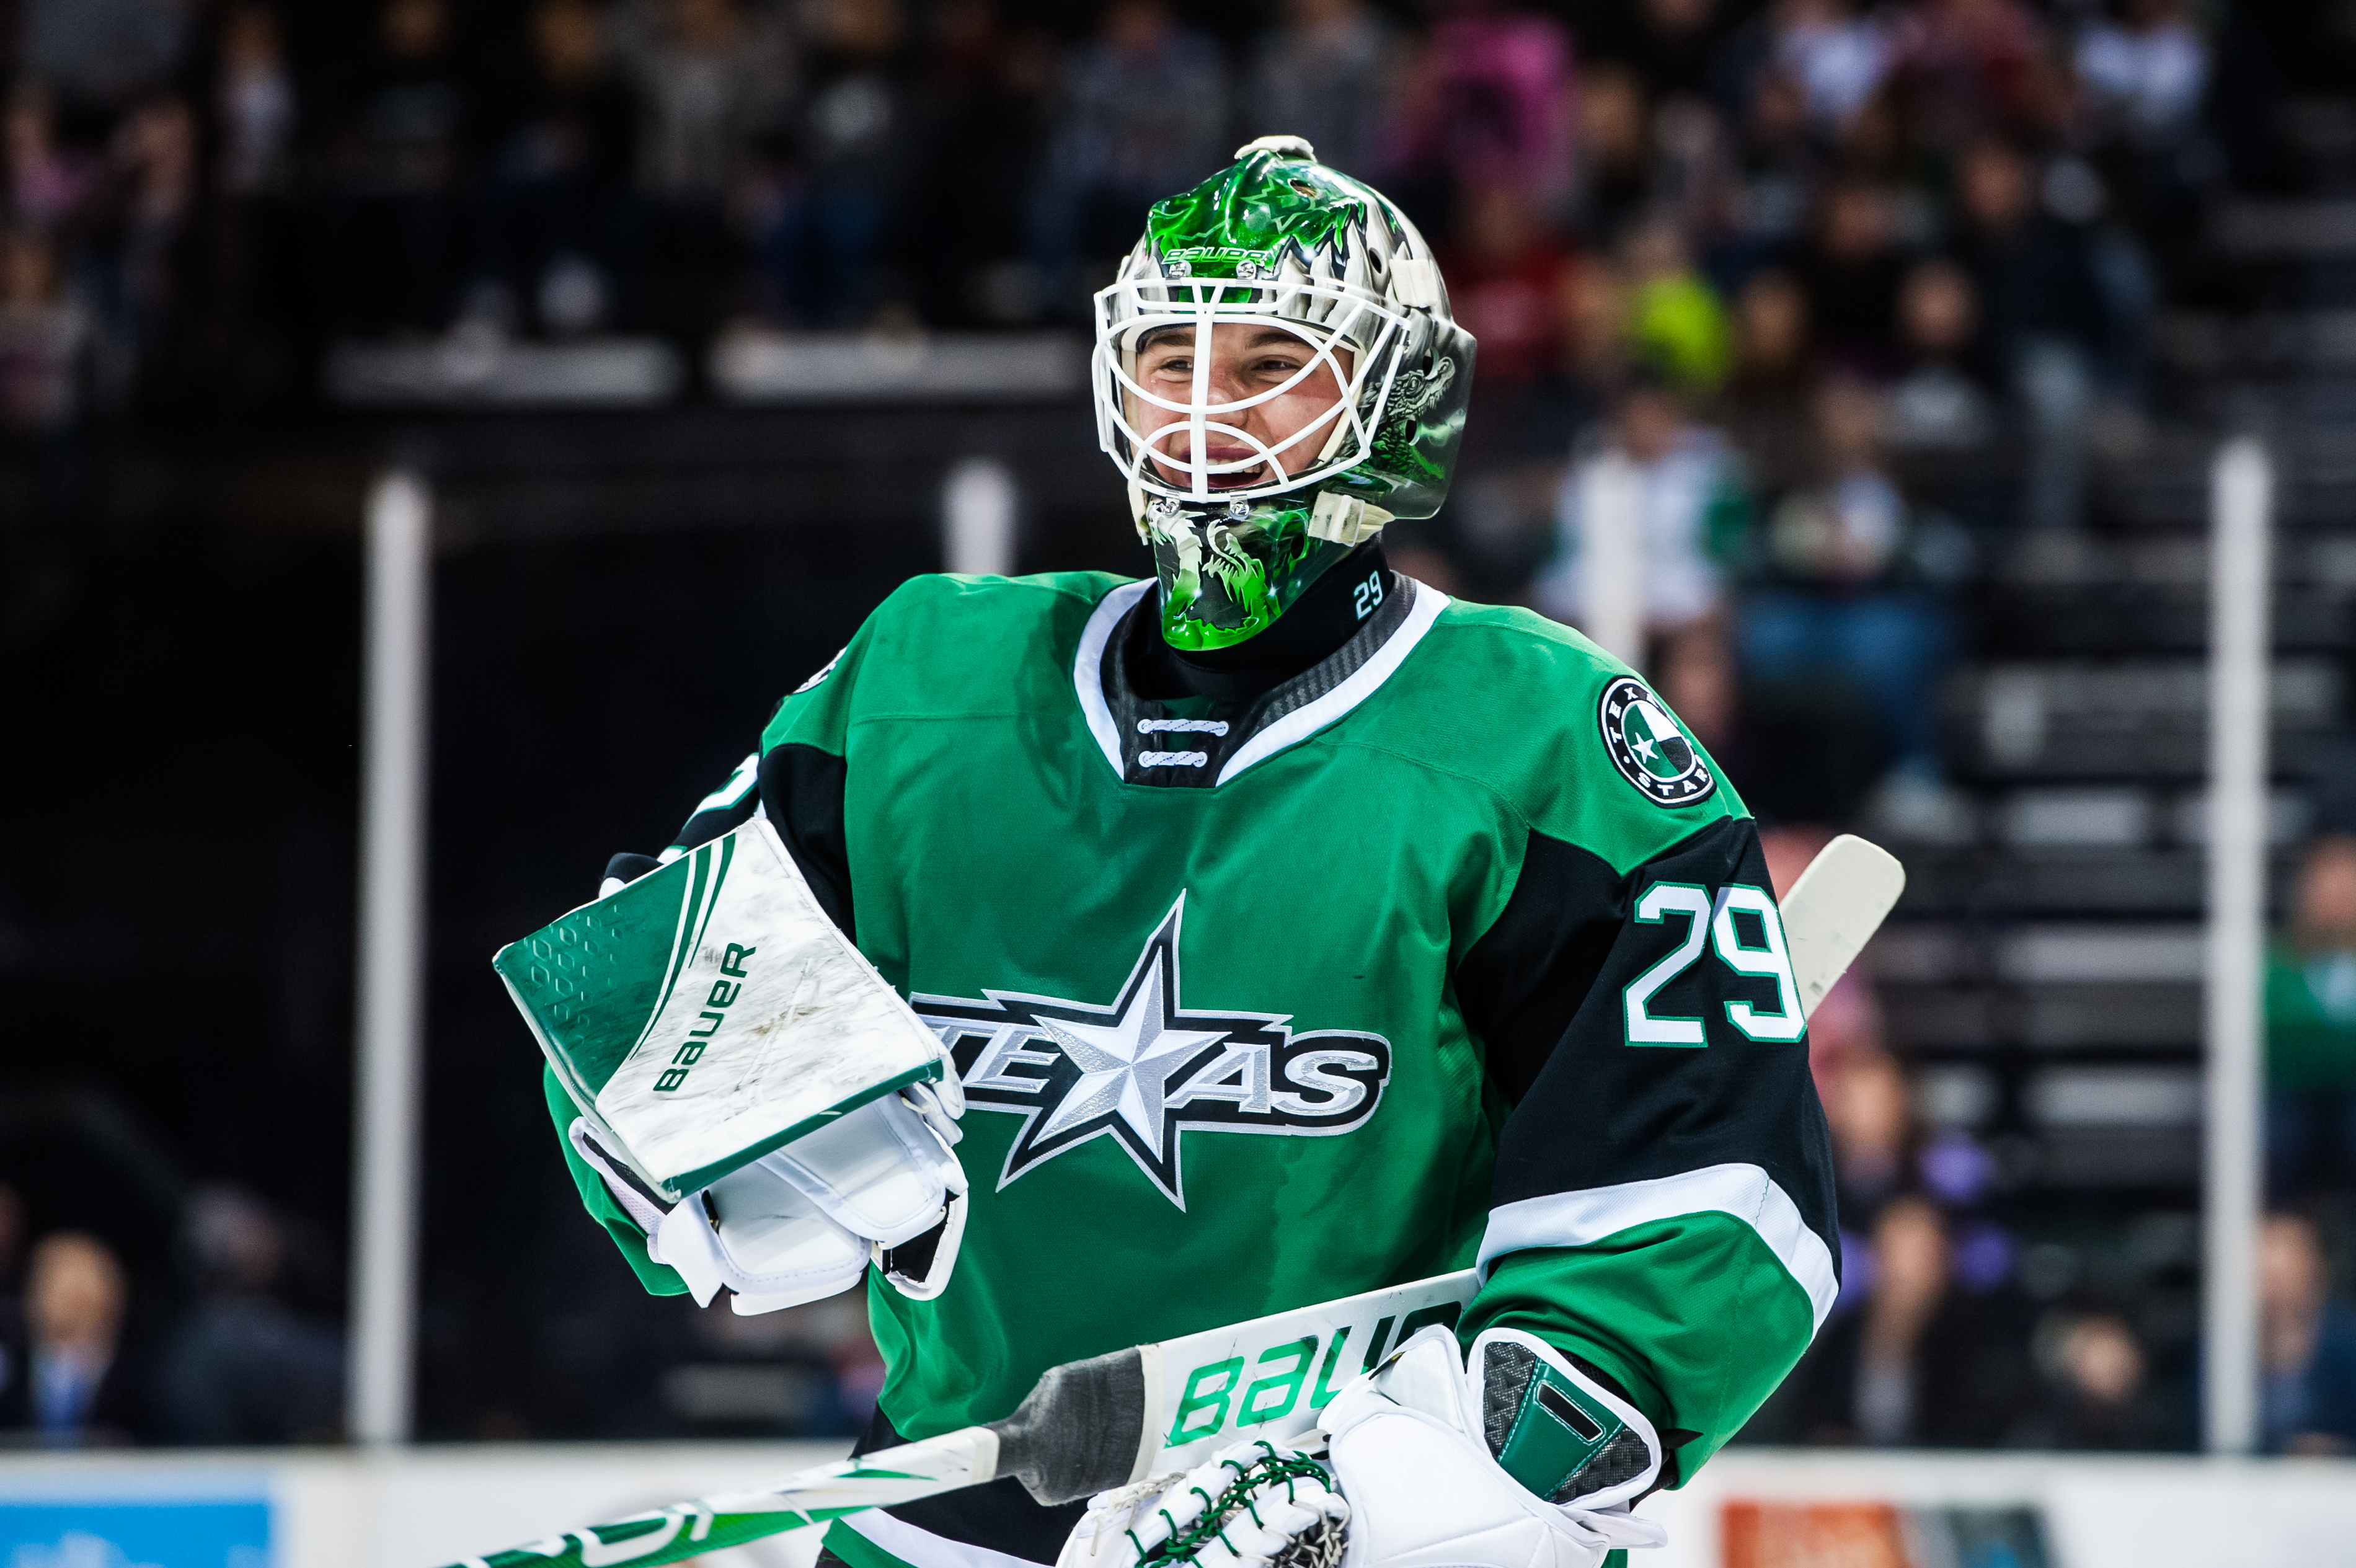 Stars sign goalie Jake Oettinger to entry-level contract